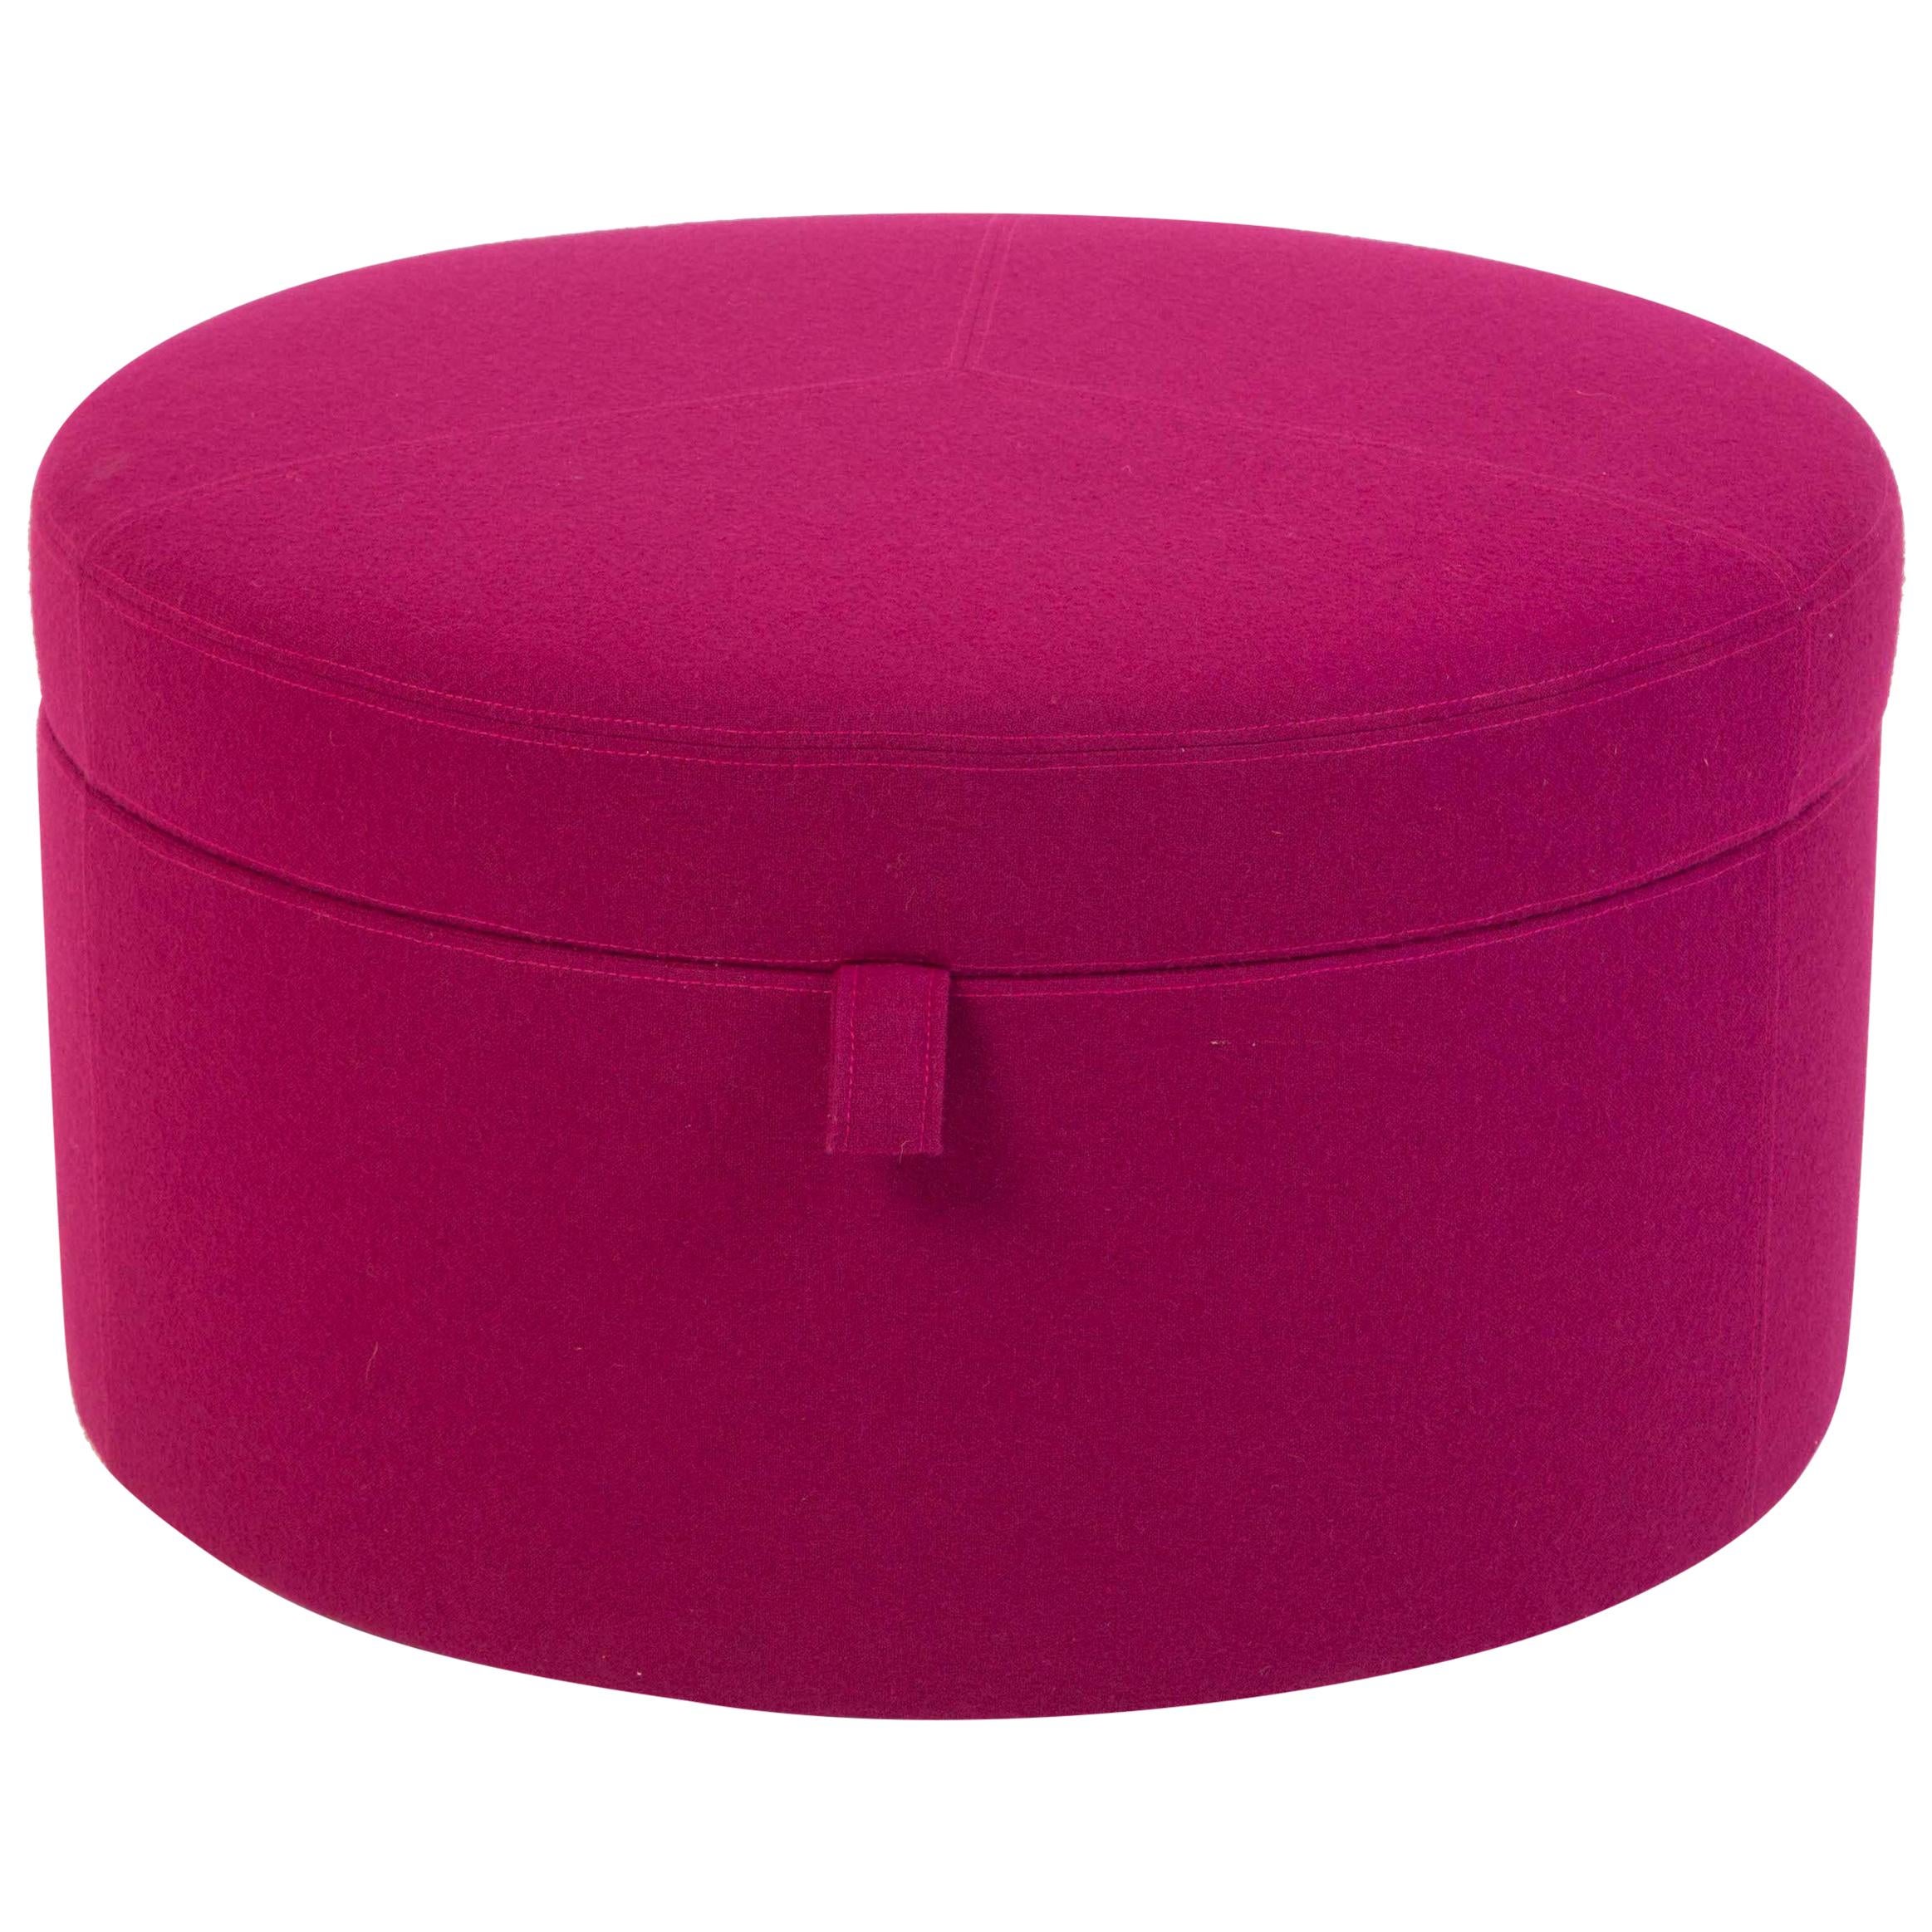 Radius Storage Ottoman-Pink, Round, Casters, Upholstered, Bedroom, Living room